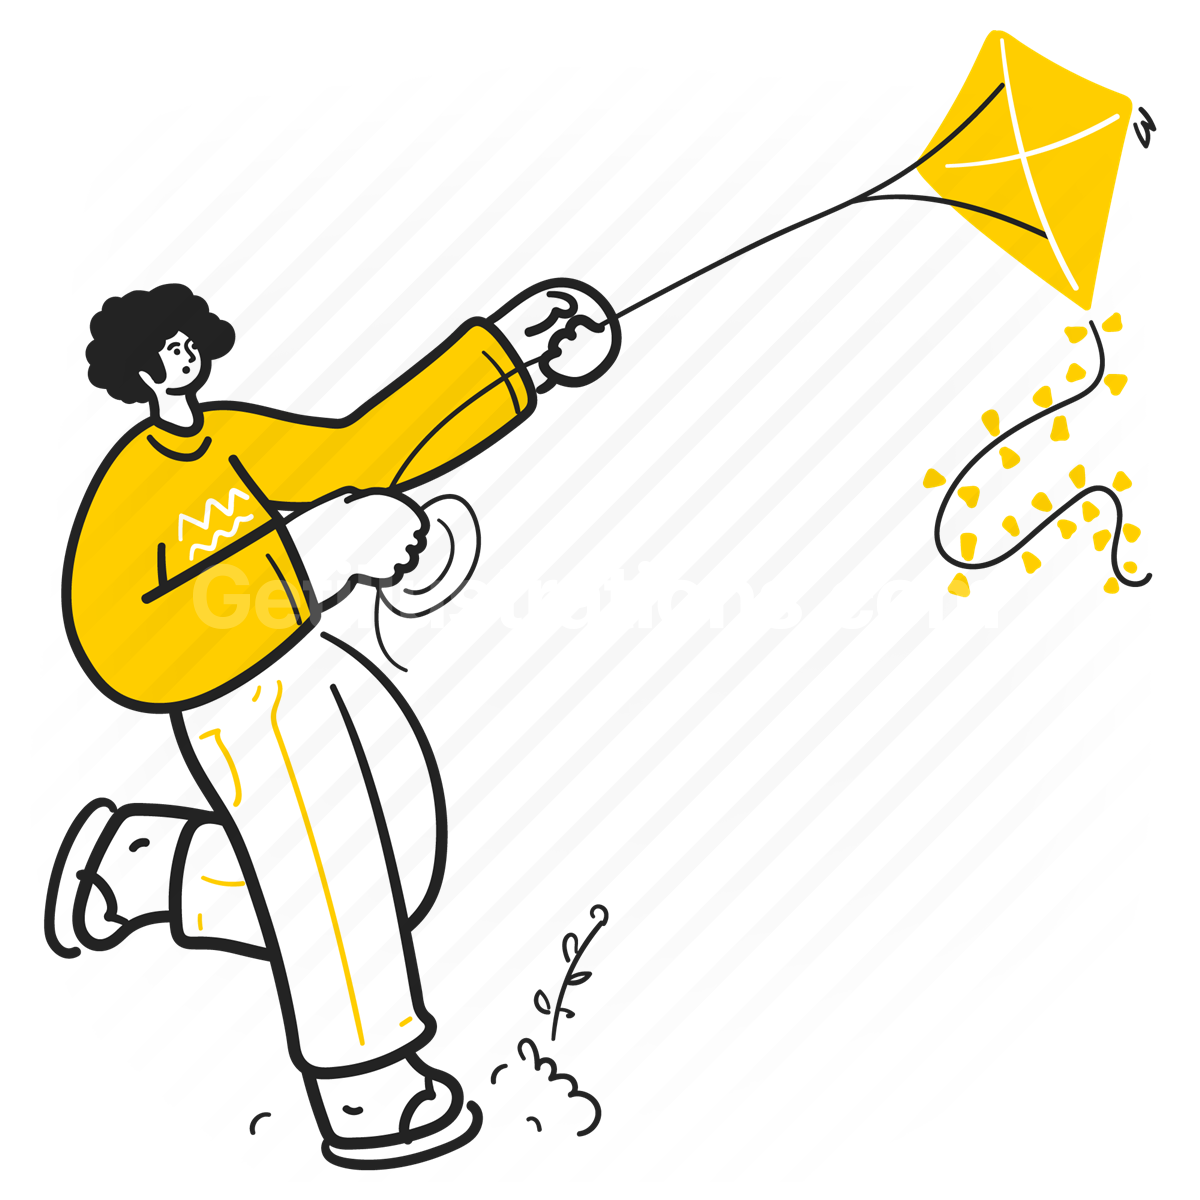 kite, flying a kite, activity, hobbies, outdoors